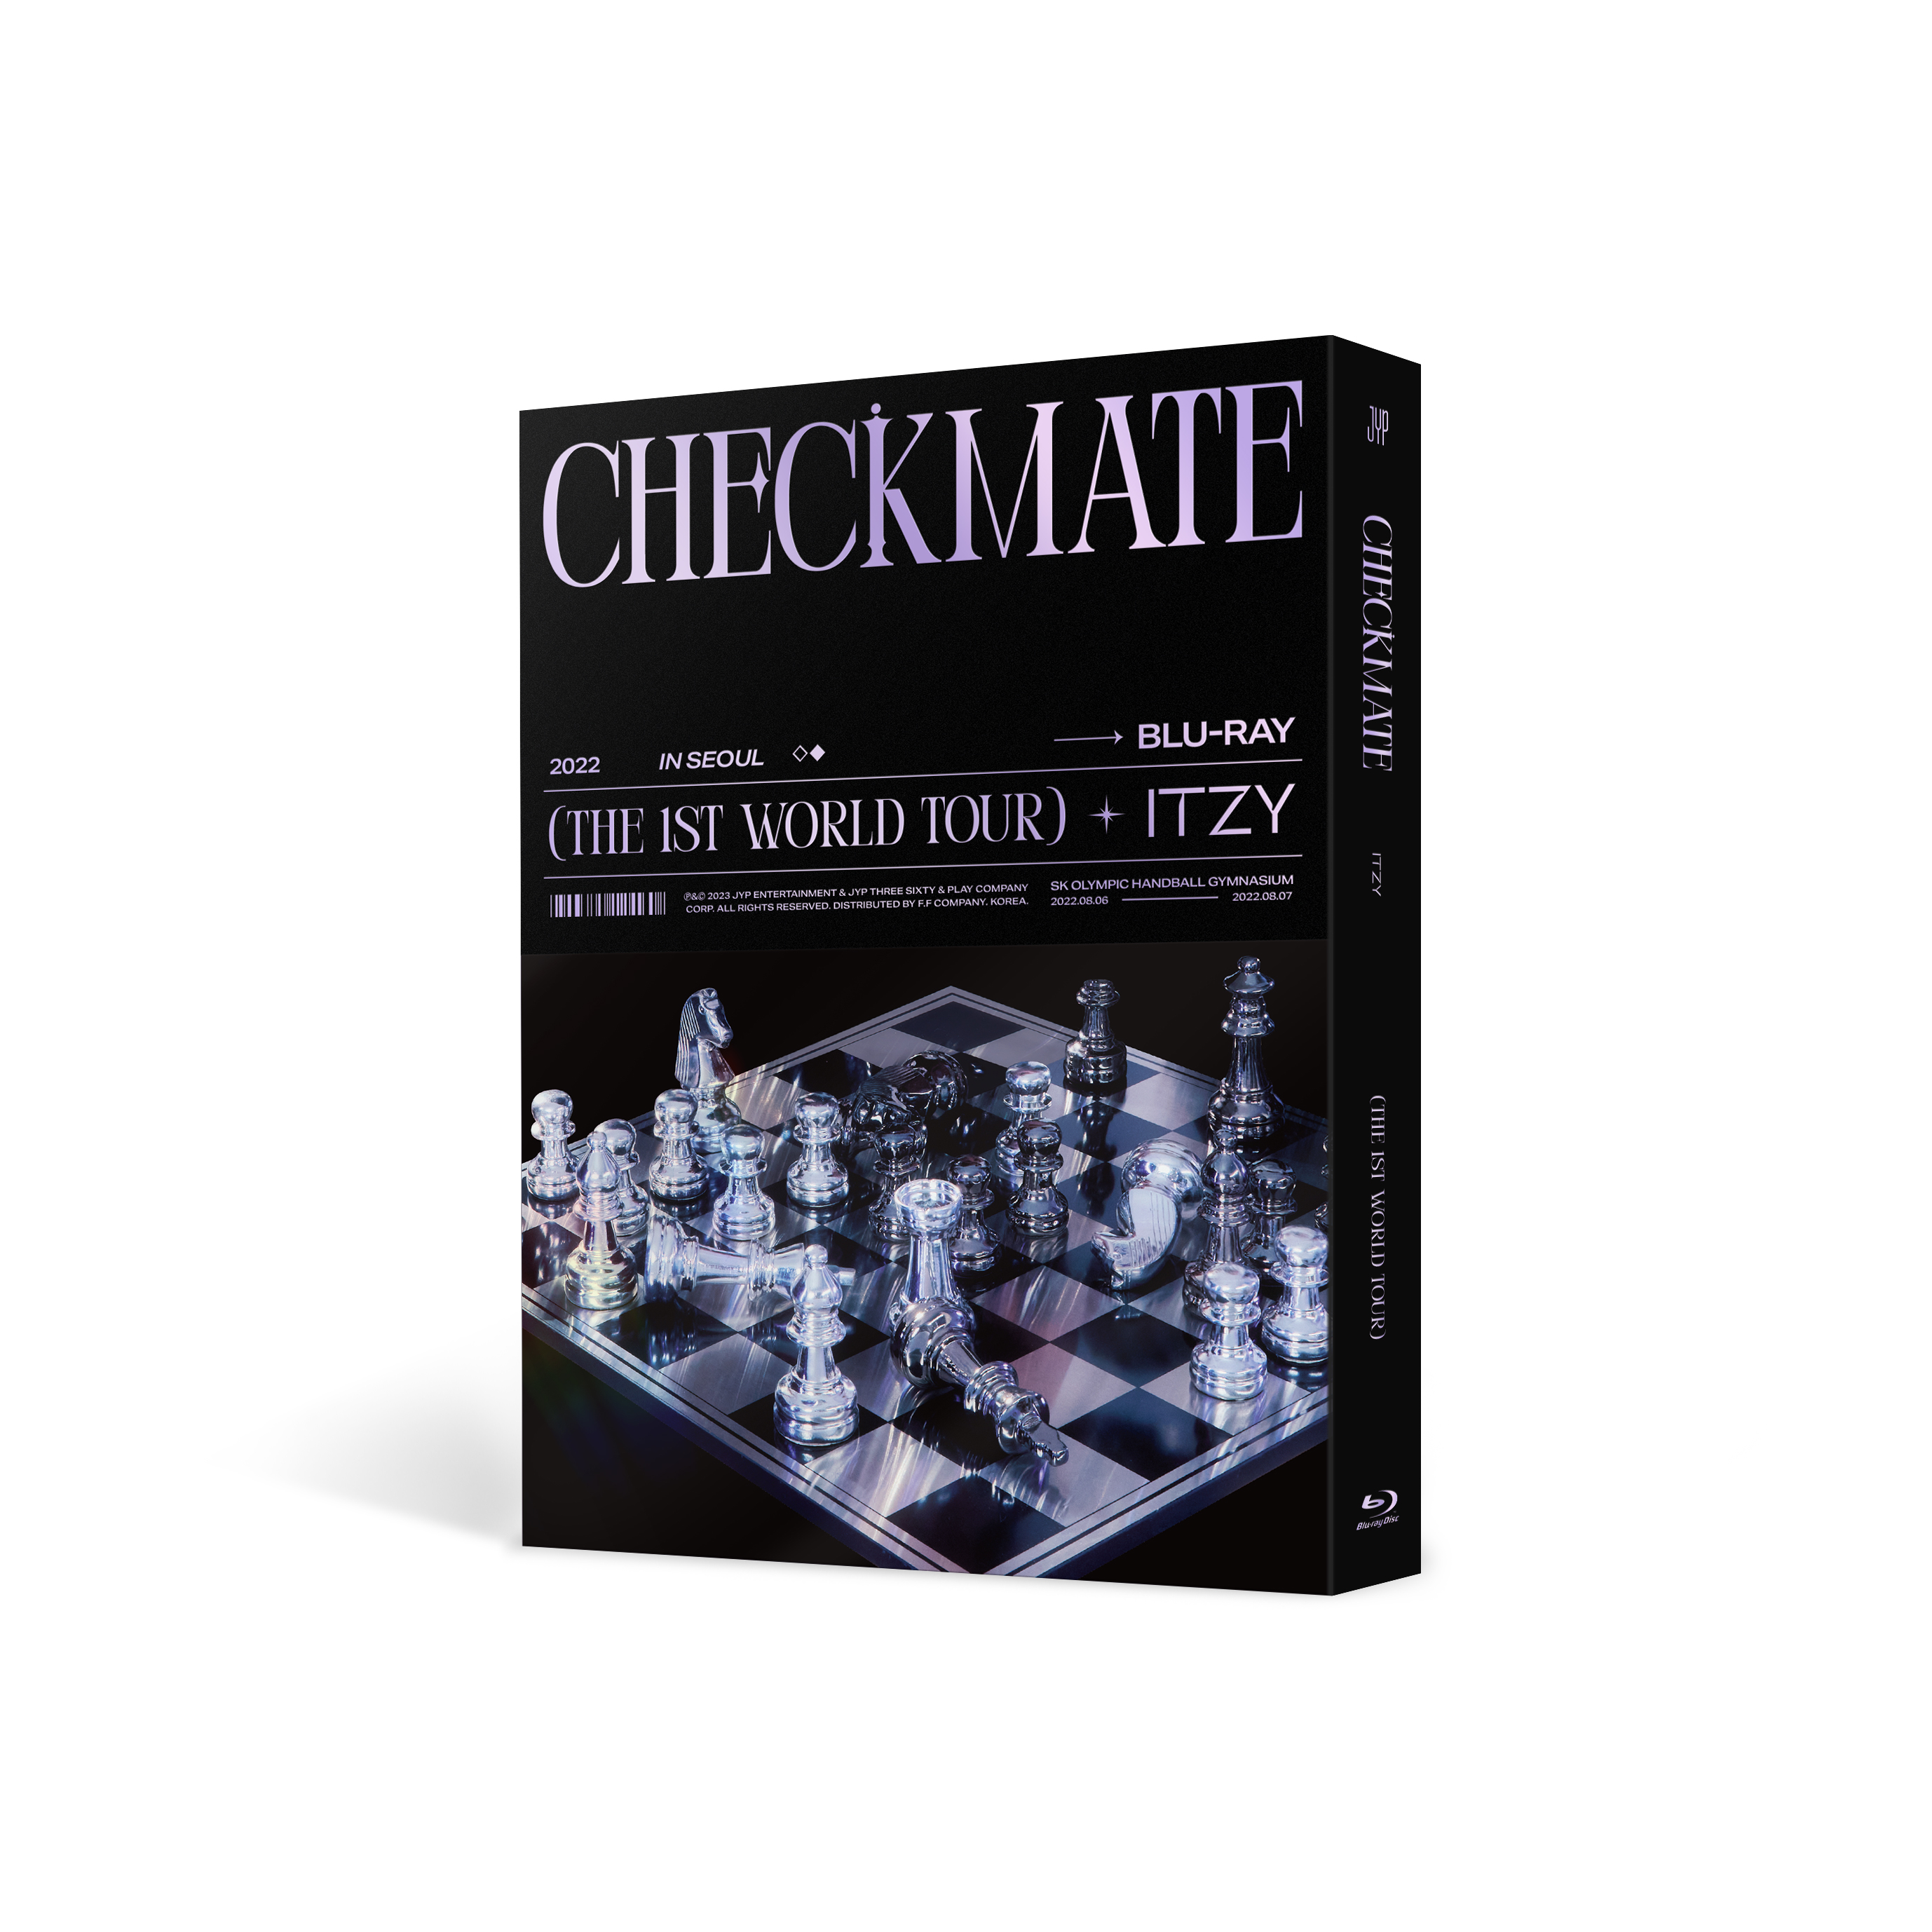 ITZY - 2022 ITZY THE 1ST WORLD TOUR [CHECKMATE] in SEOUL Blu-ray